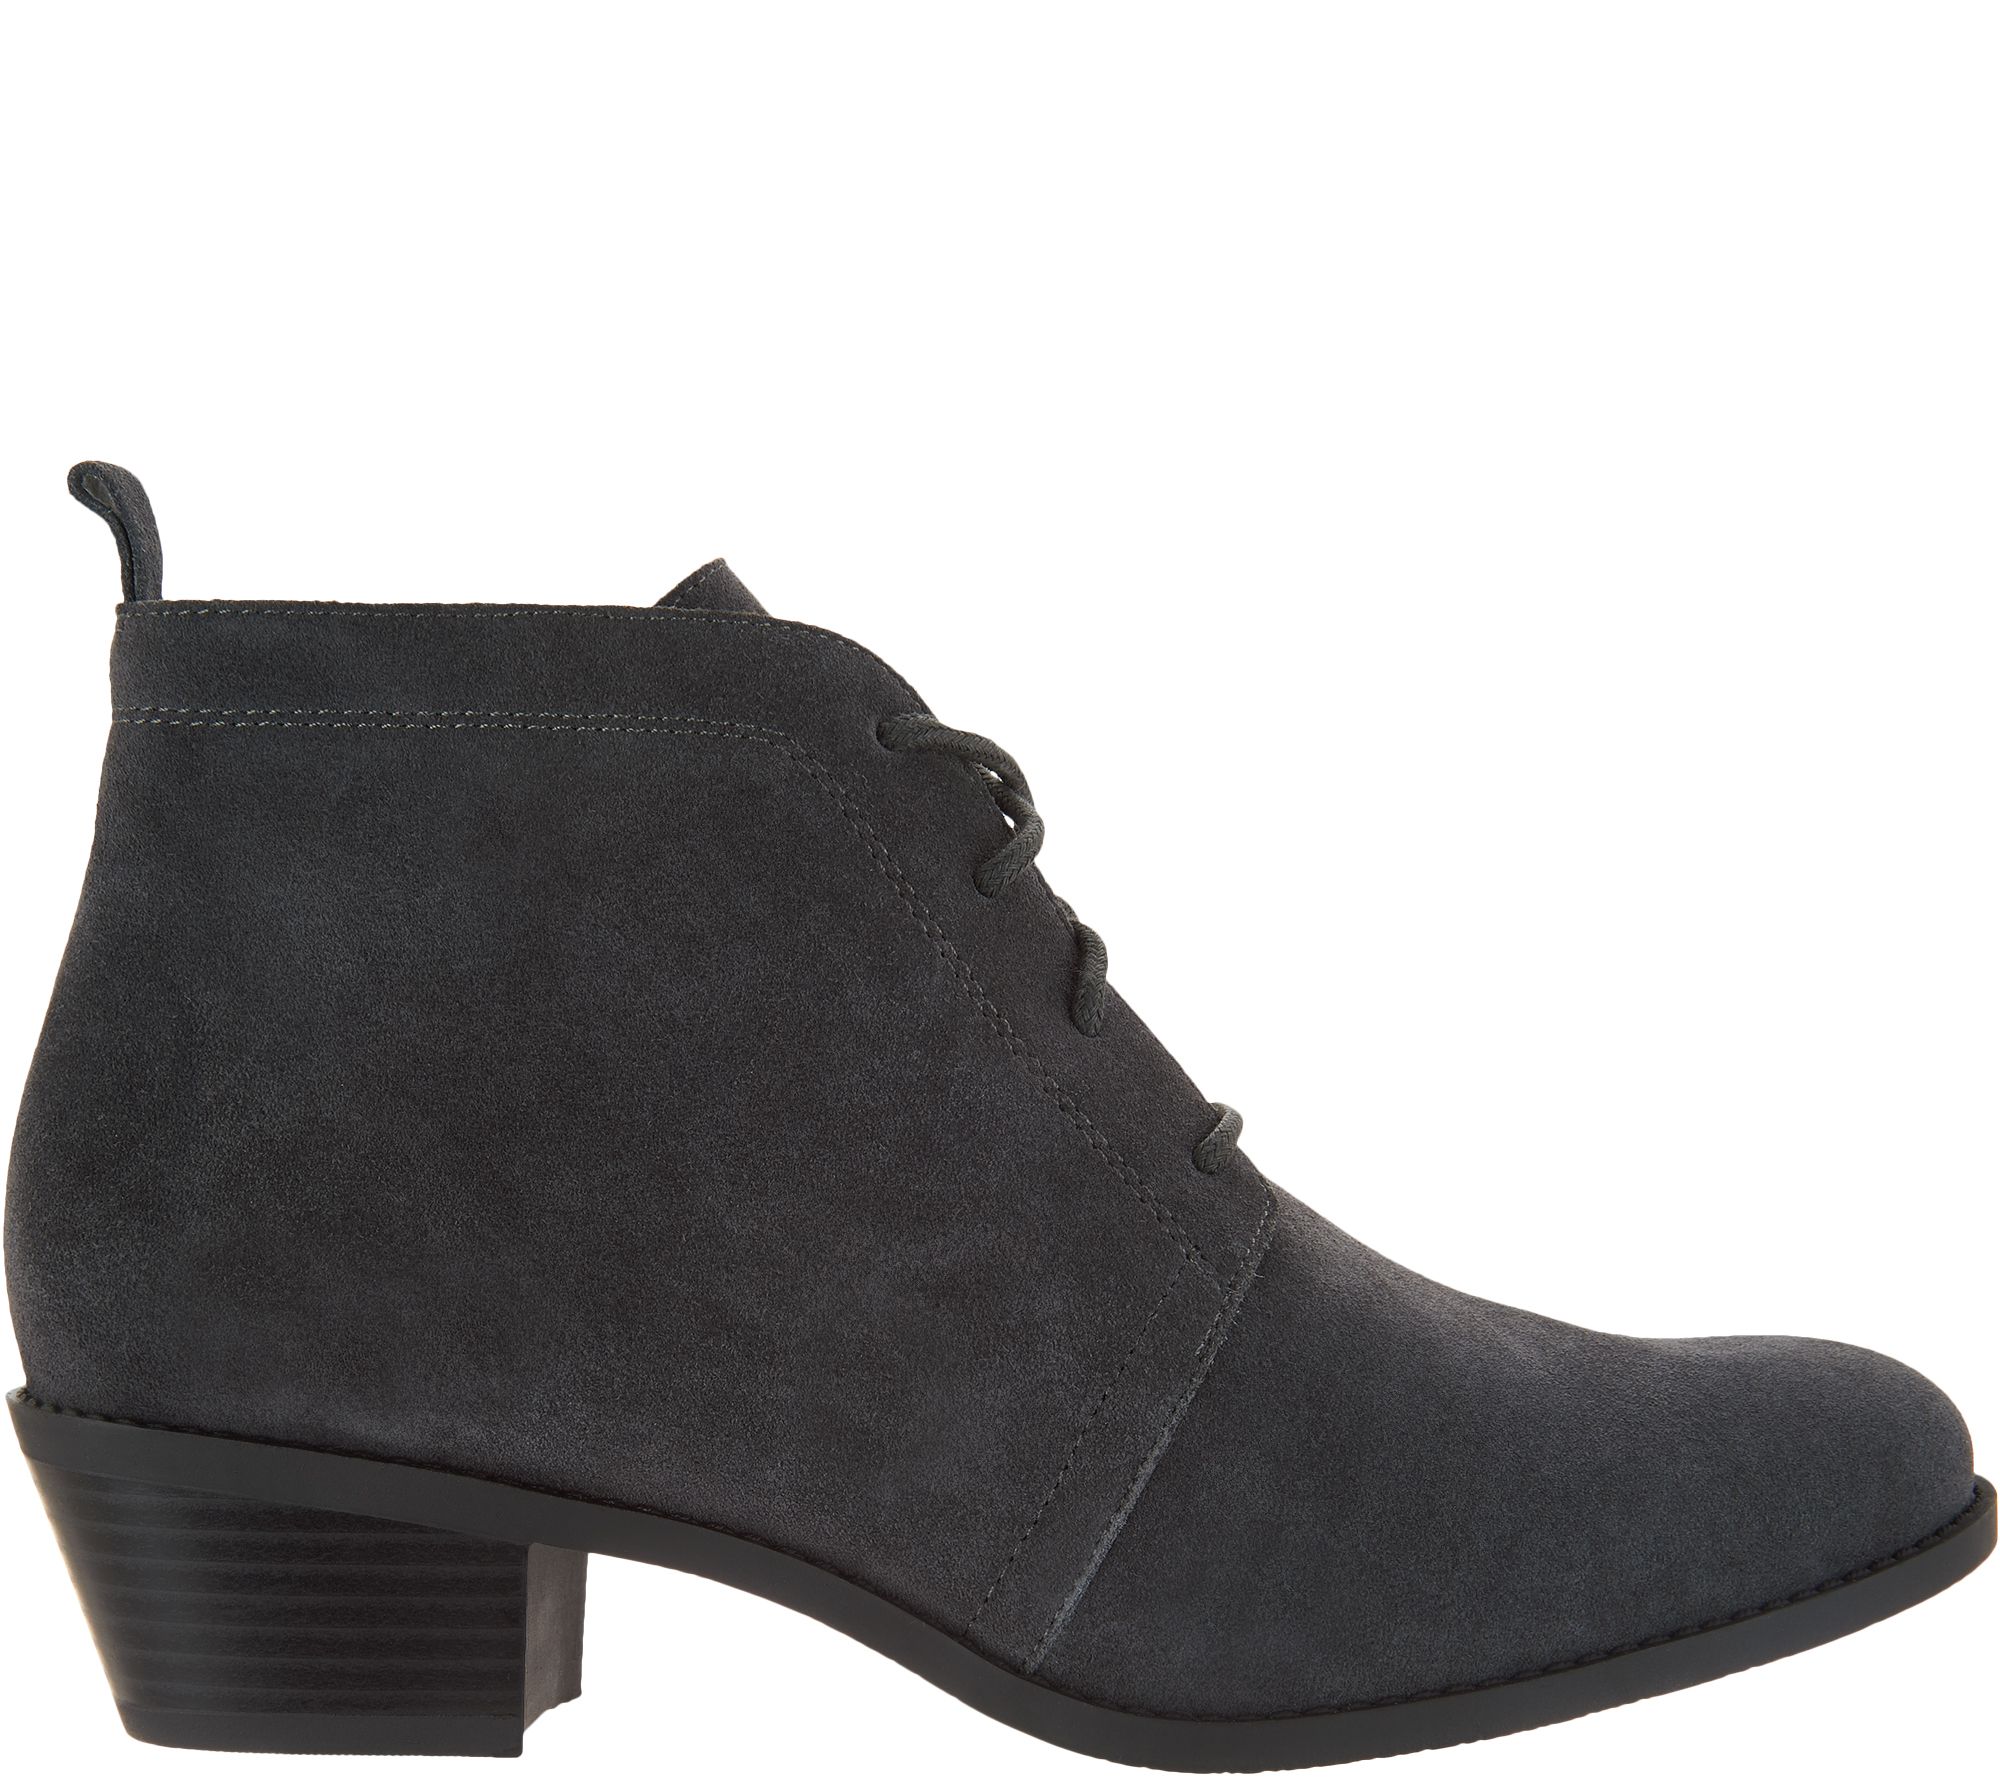 Vionic Suede Lace-up Ankle Boots - Andi - QVC.com